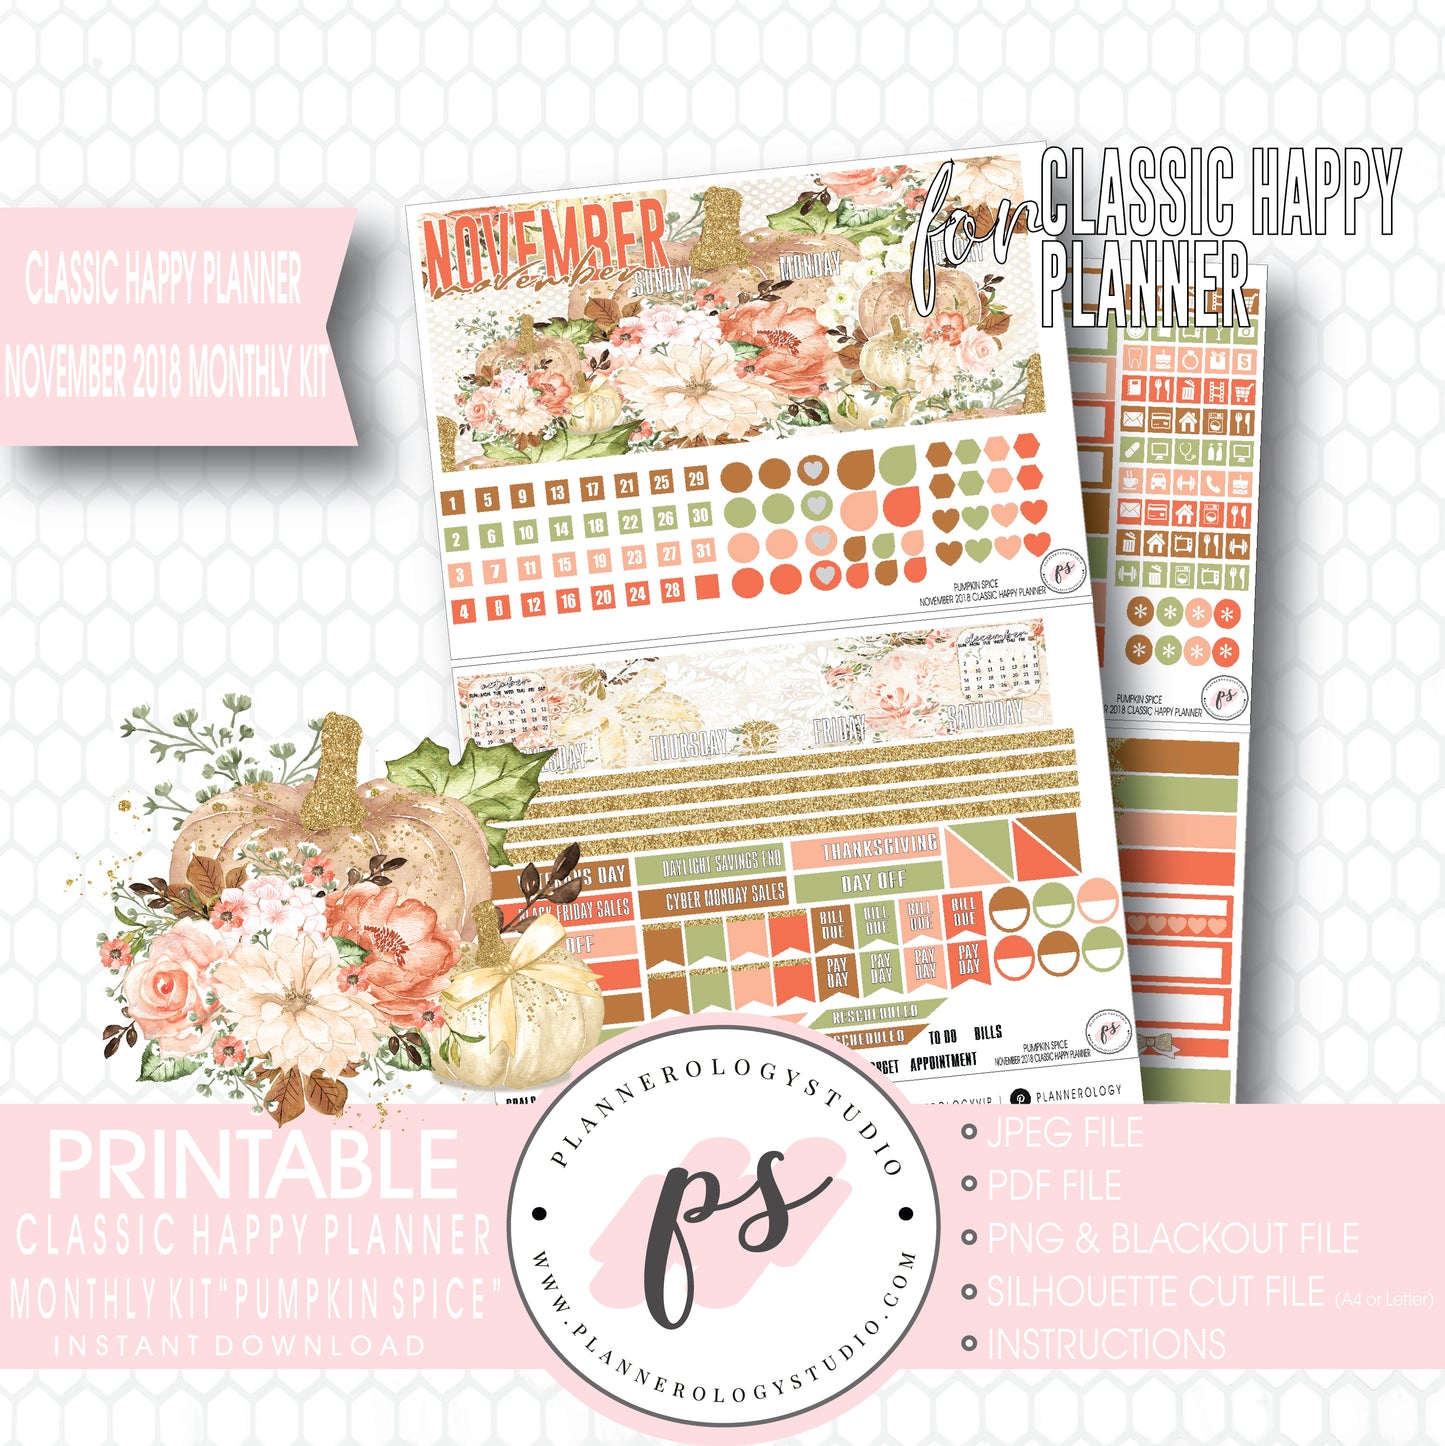 Pumpkin Spice November 2018 Monthly View Kit Digital Printable Planner Stickers (for use with Classic Happy Planner) - Plannerologystudio